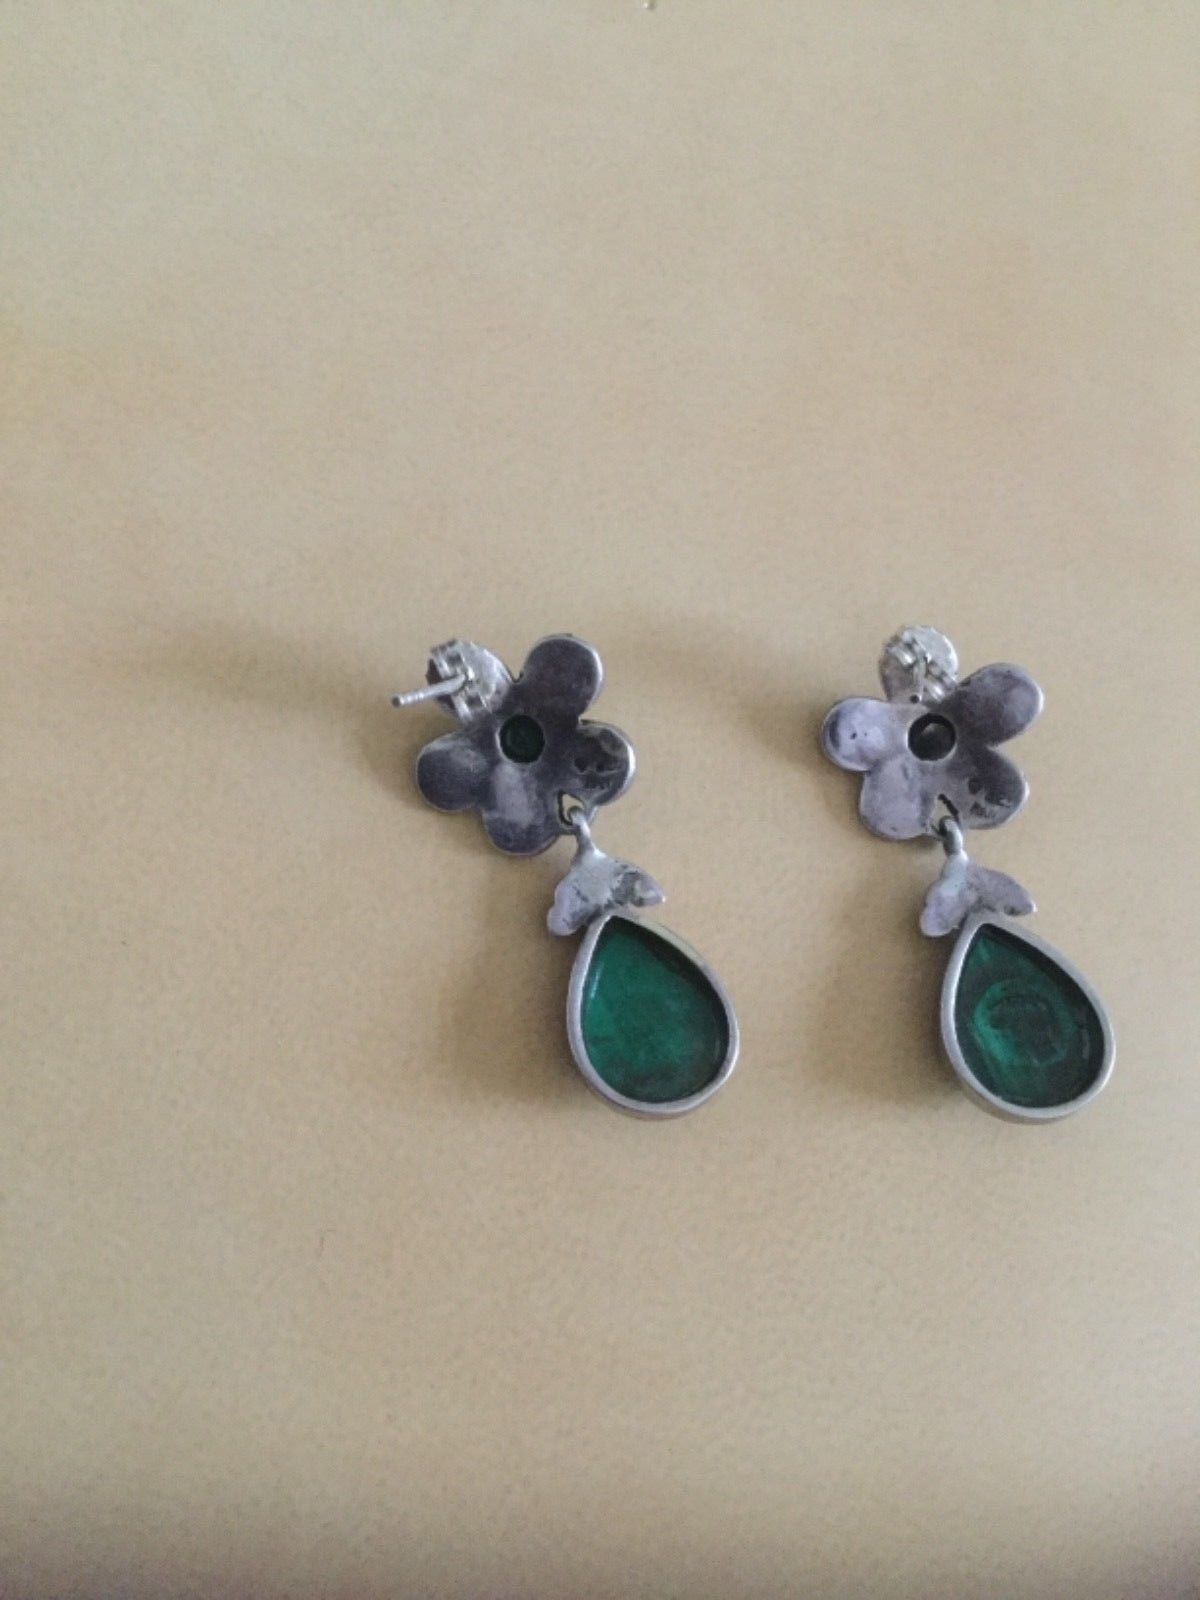 Vintage Silver Marcasite and Green Malachite Earrings - Image 2 of 5